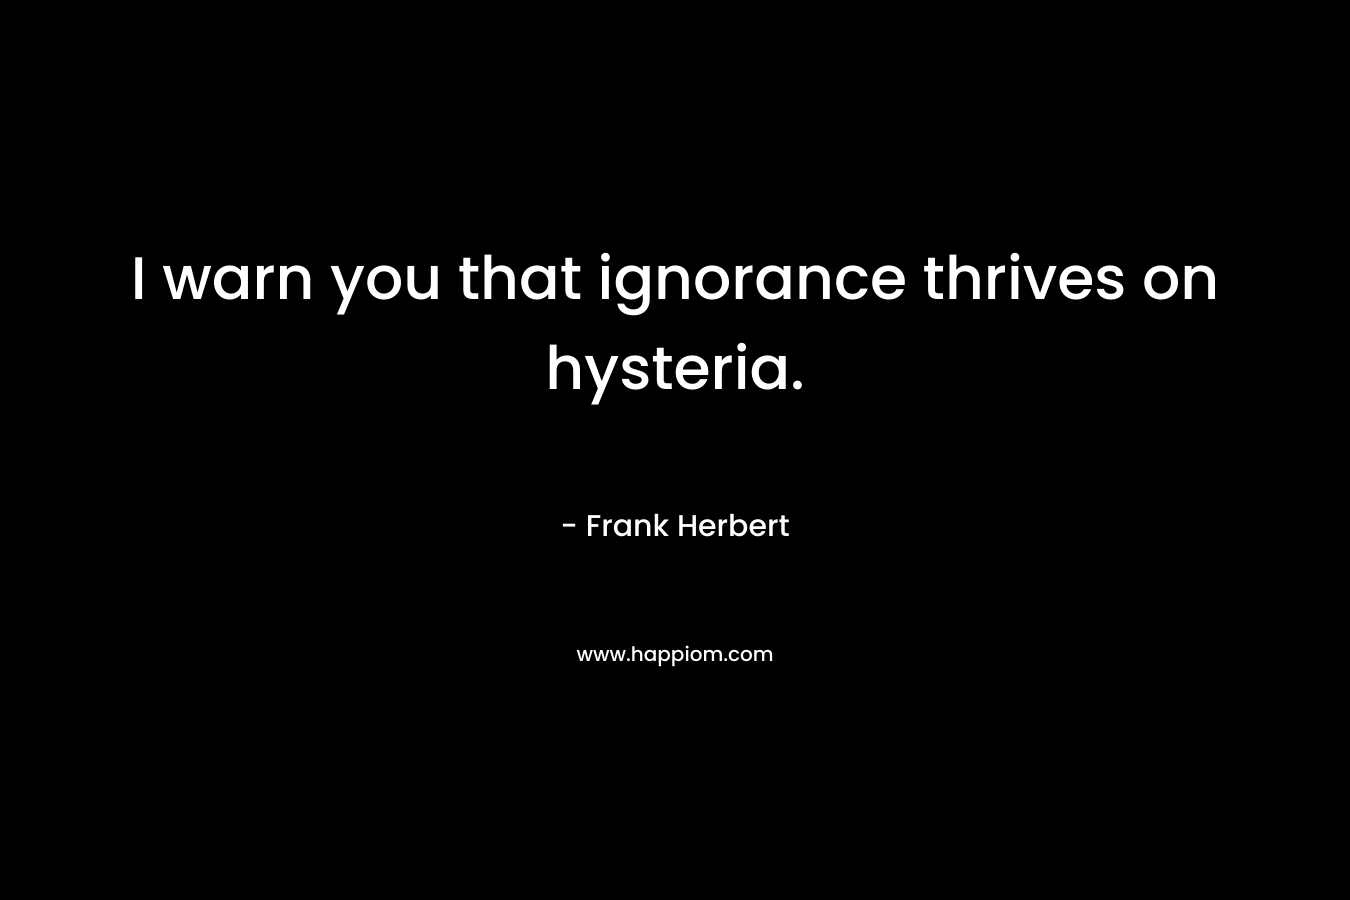 I warn you that ignorance thrives on hysteria.